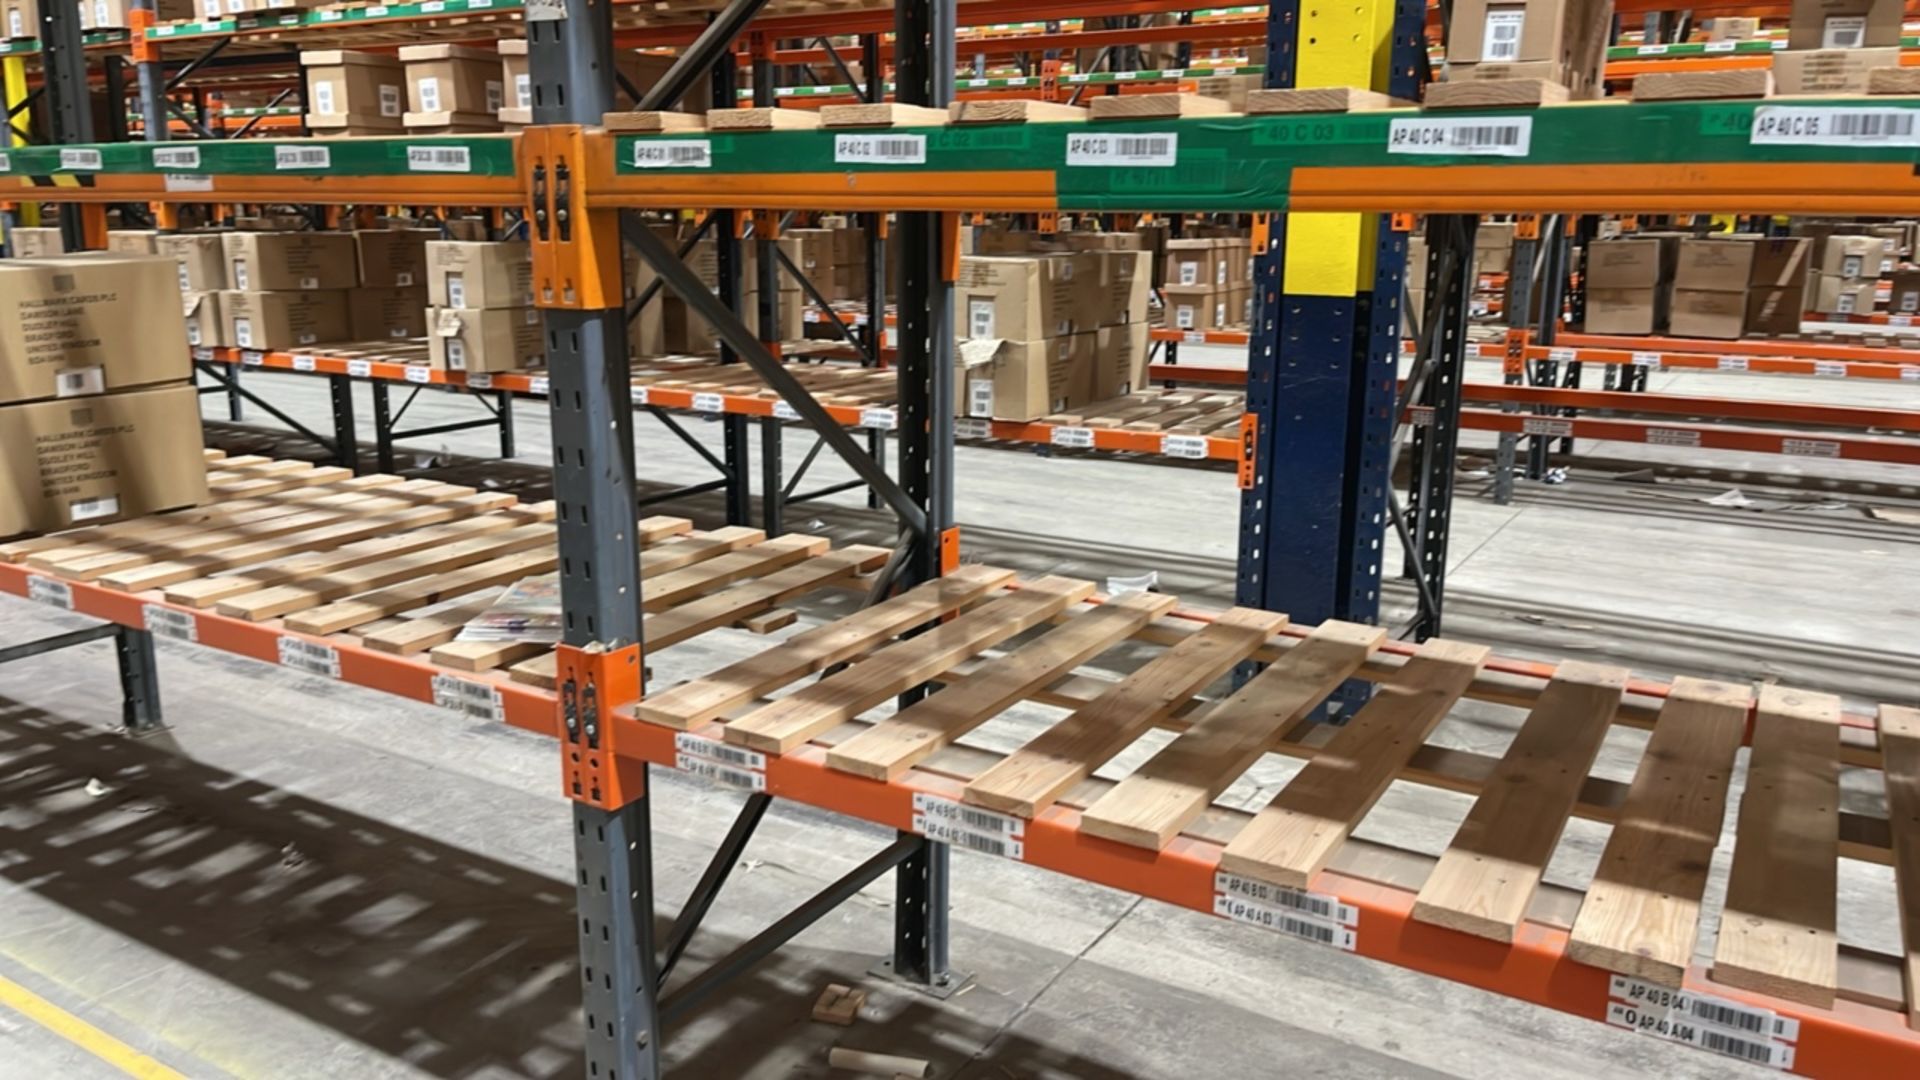 Run Of 20 Bays Of Boltless Industrial Pallet Racking - Image 11 of 11